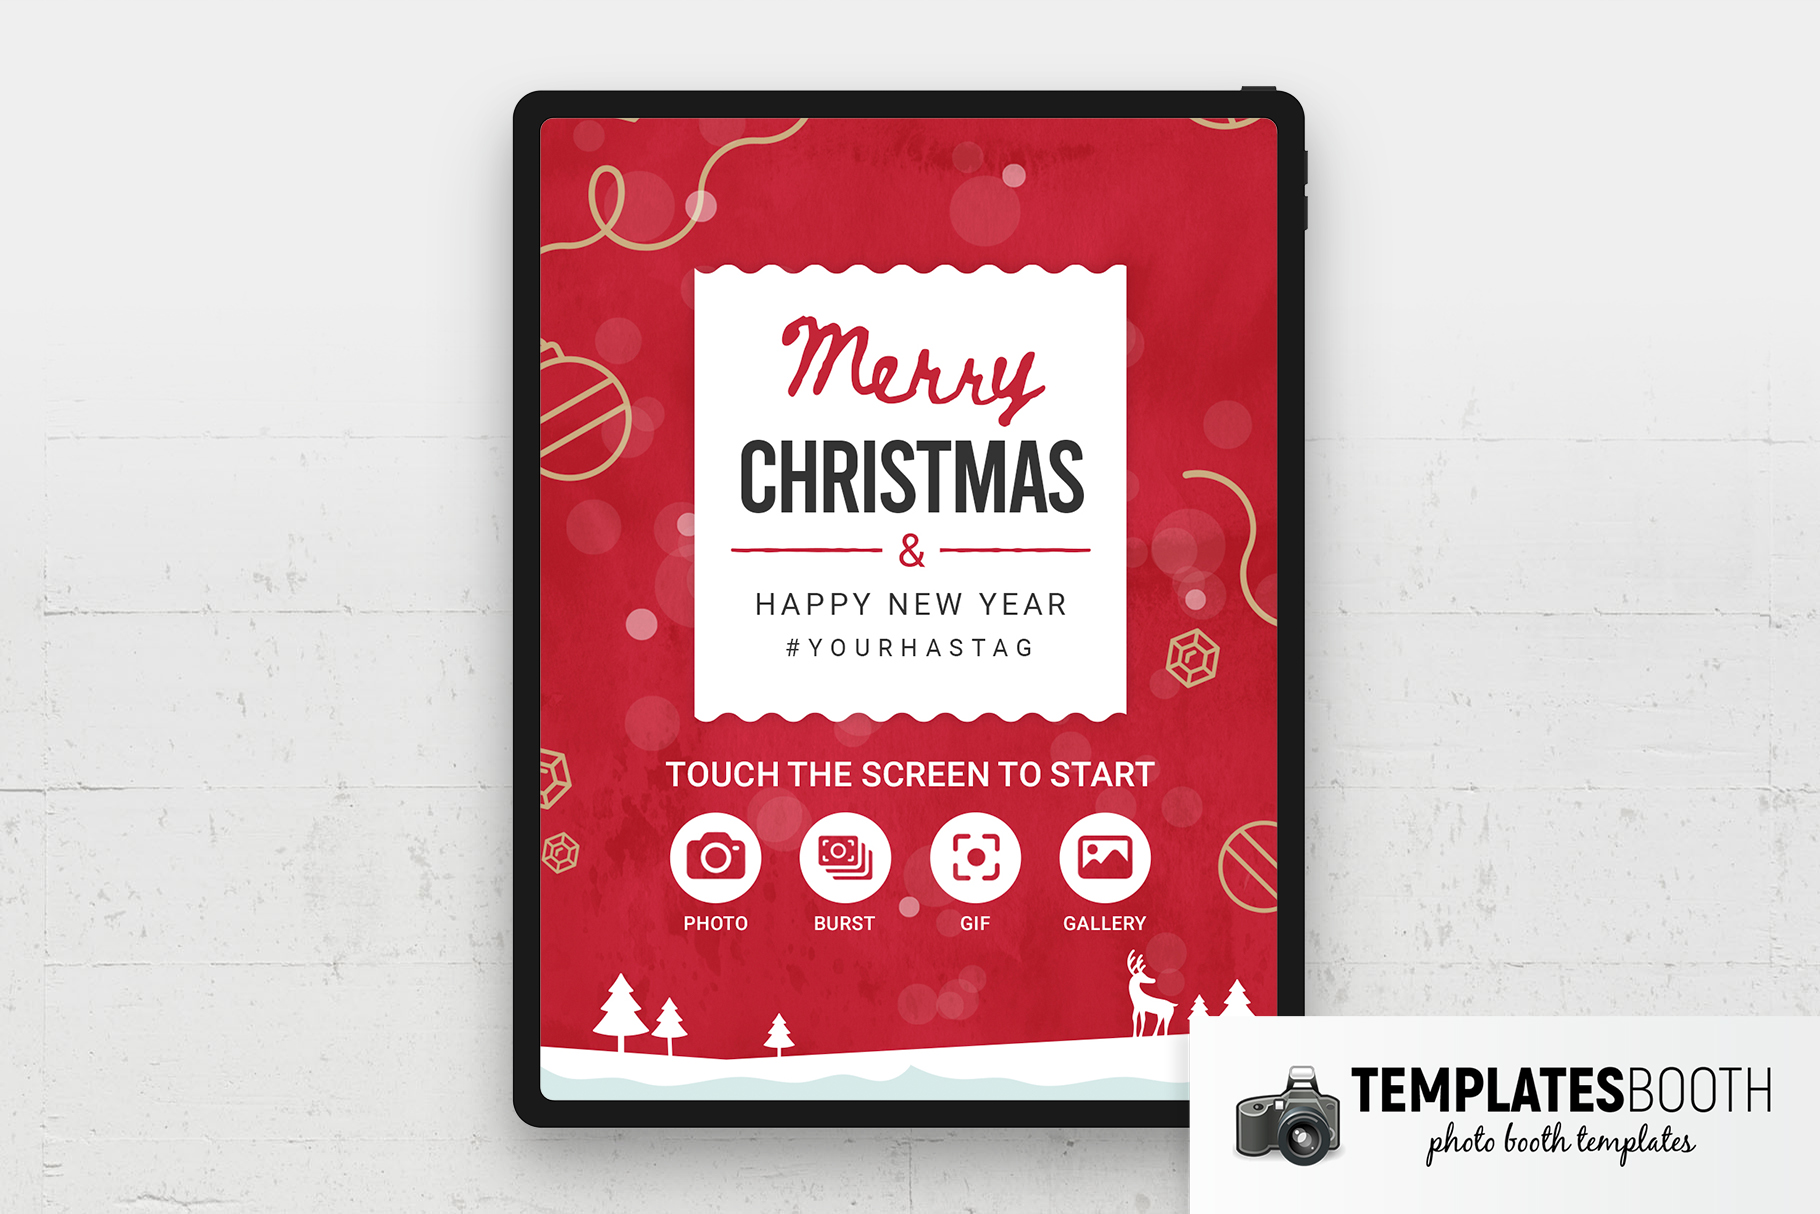 Merry Christmas Photo Booth Welcome Screen